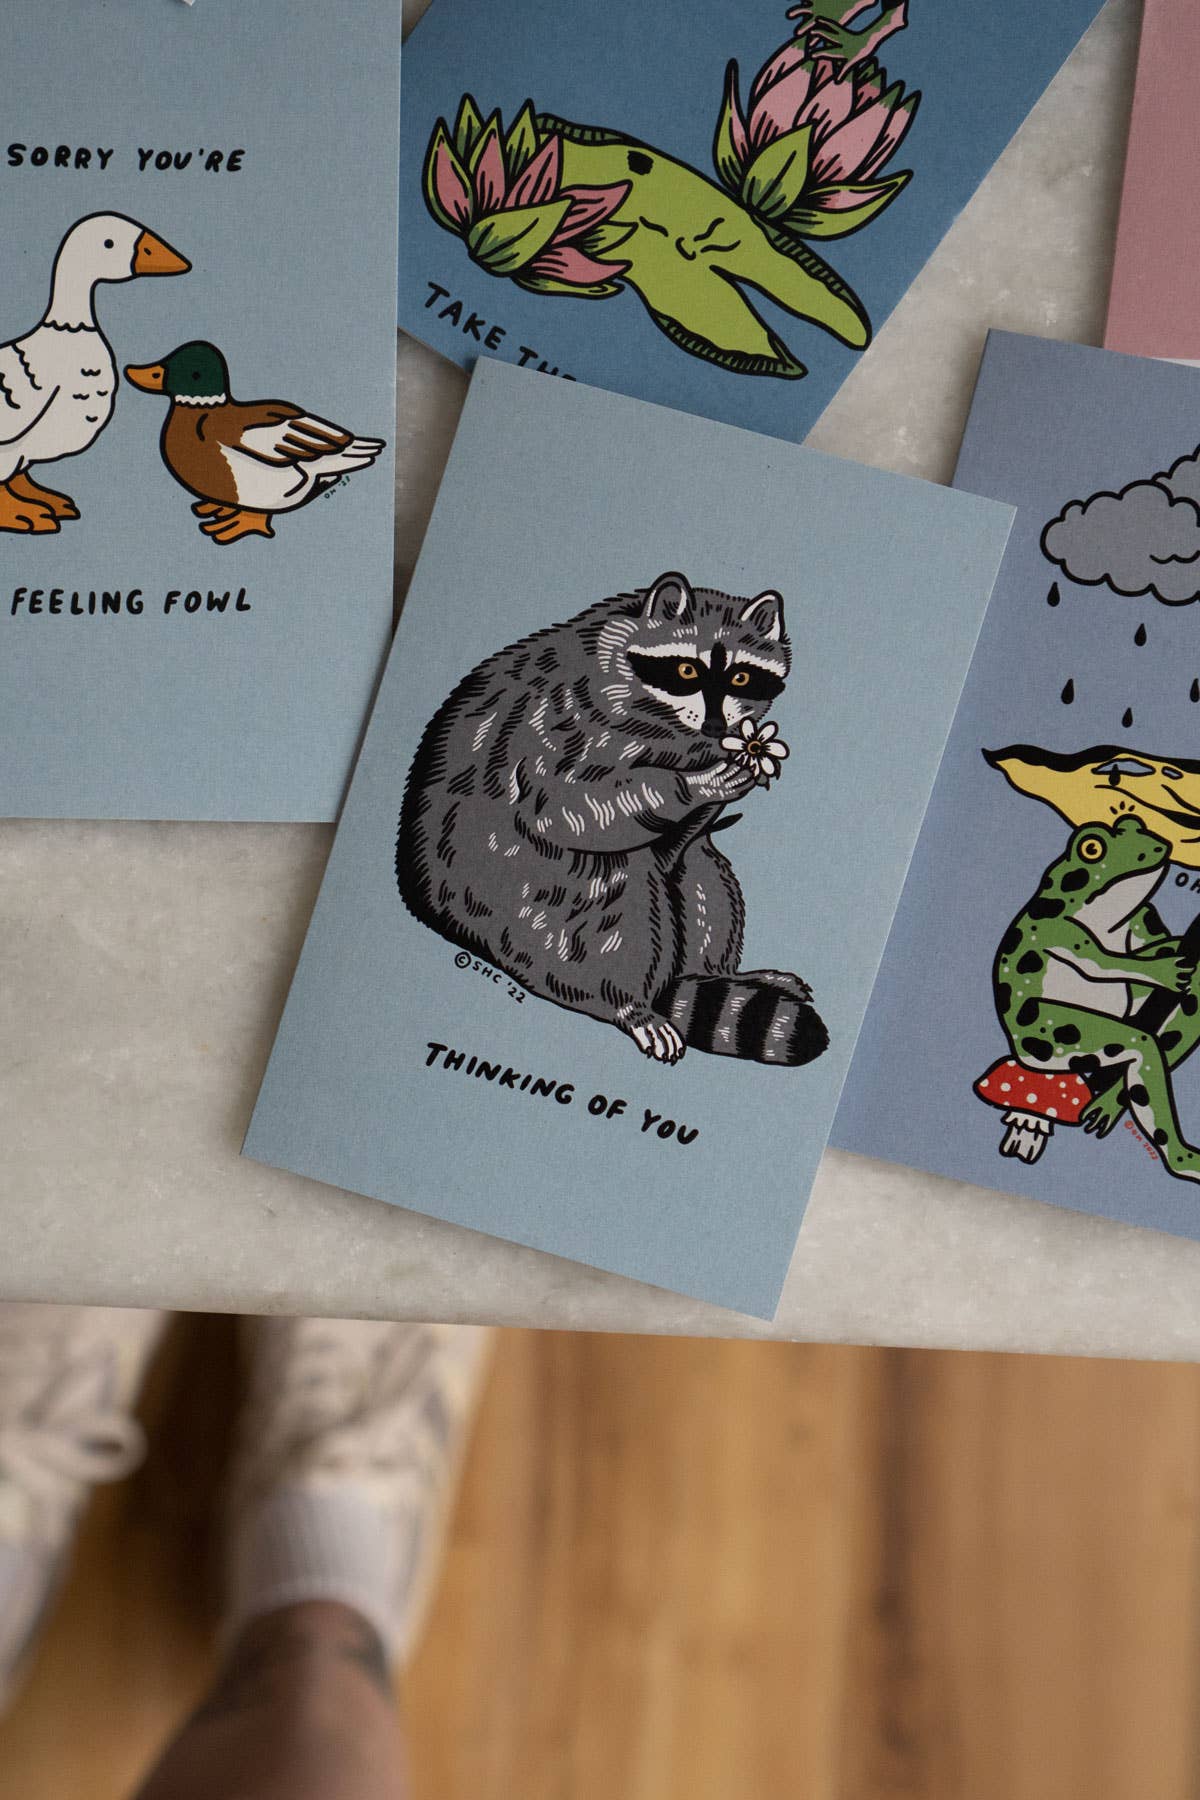 Thinking of You (Raccoon) Greeting Card